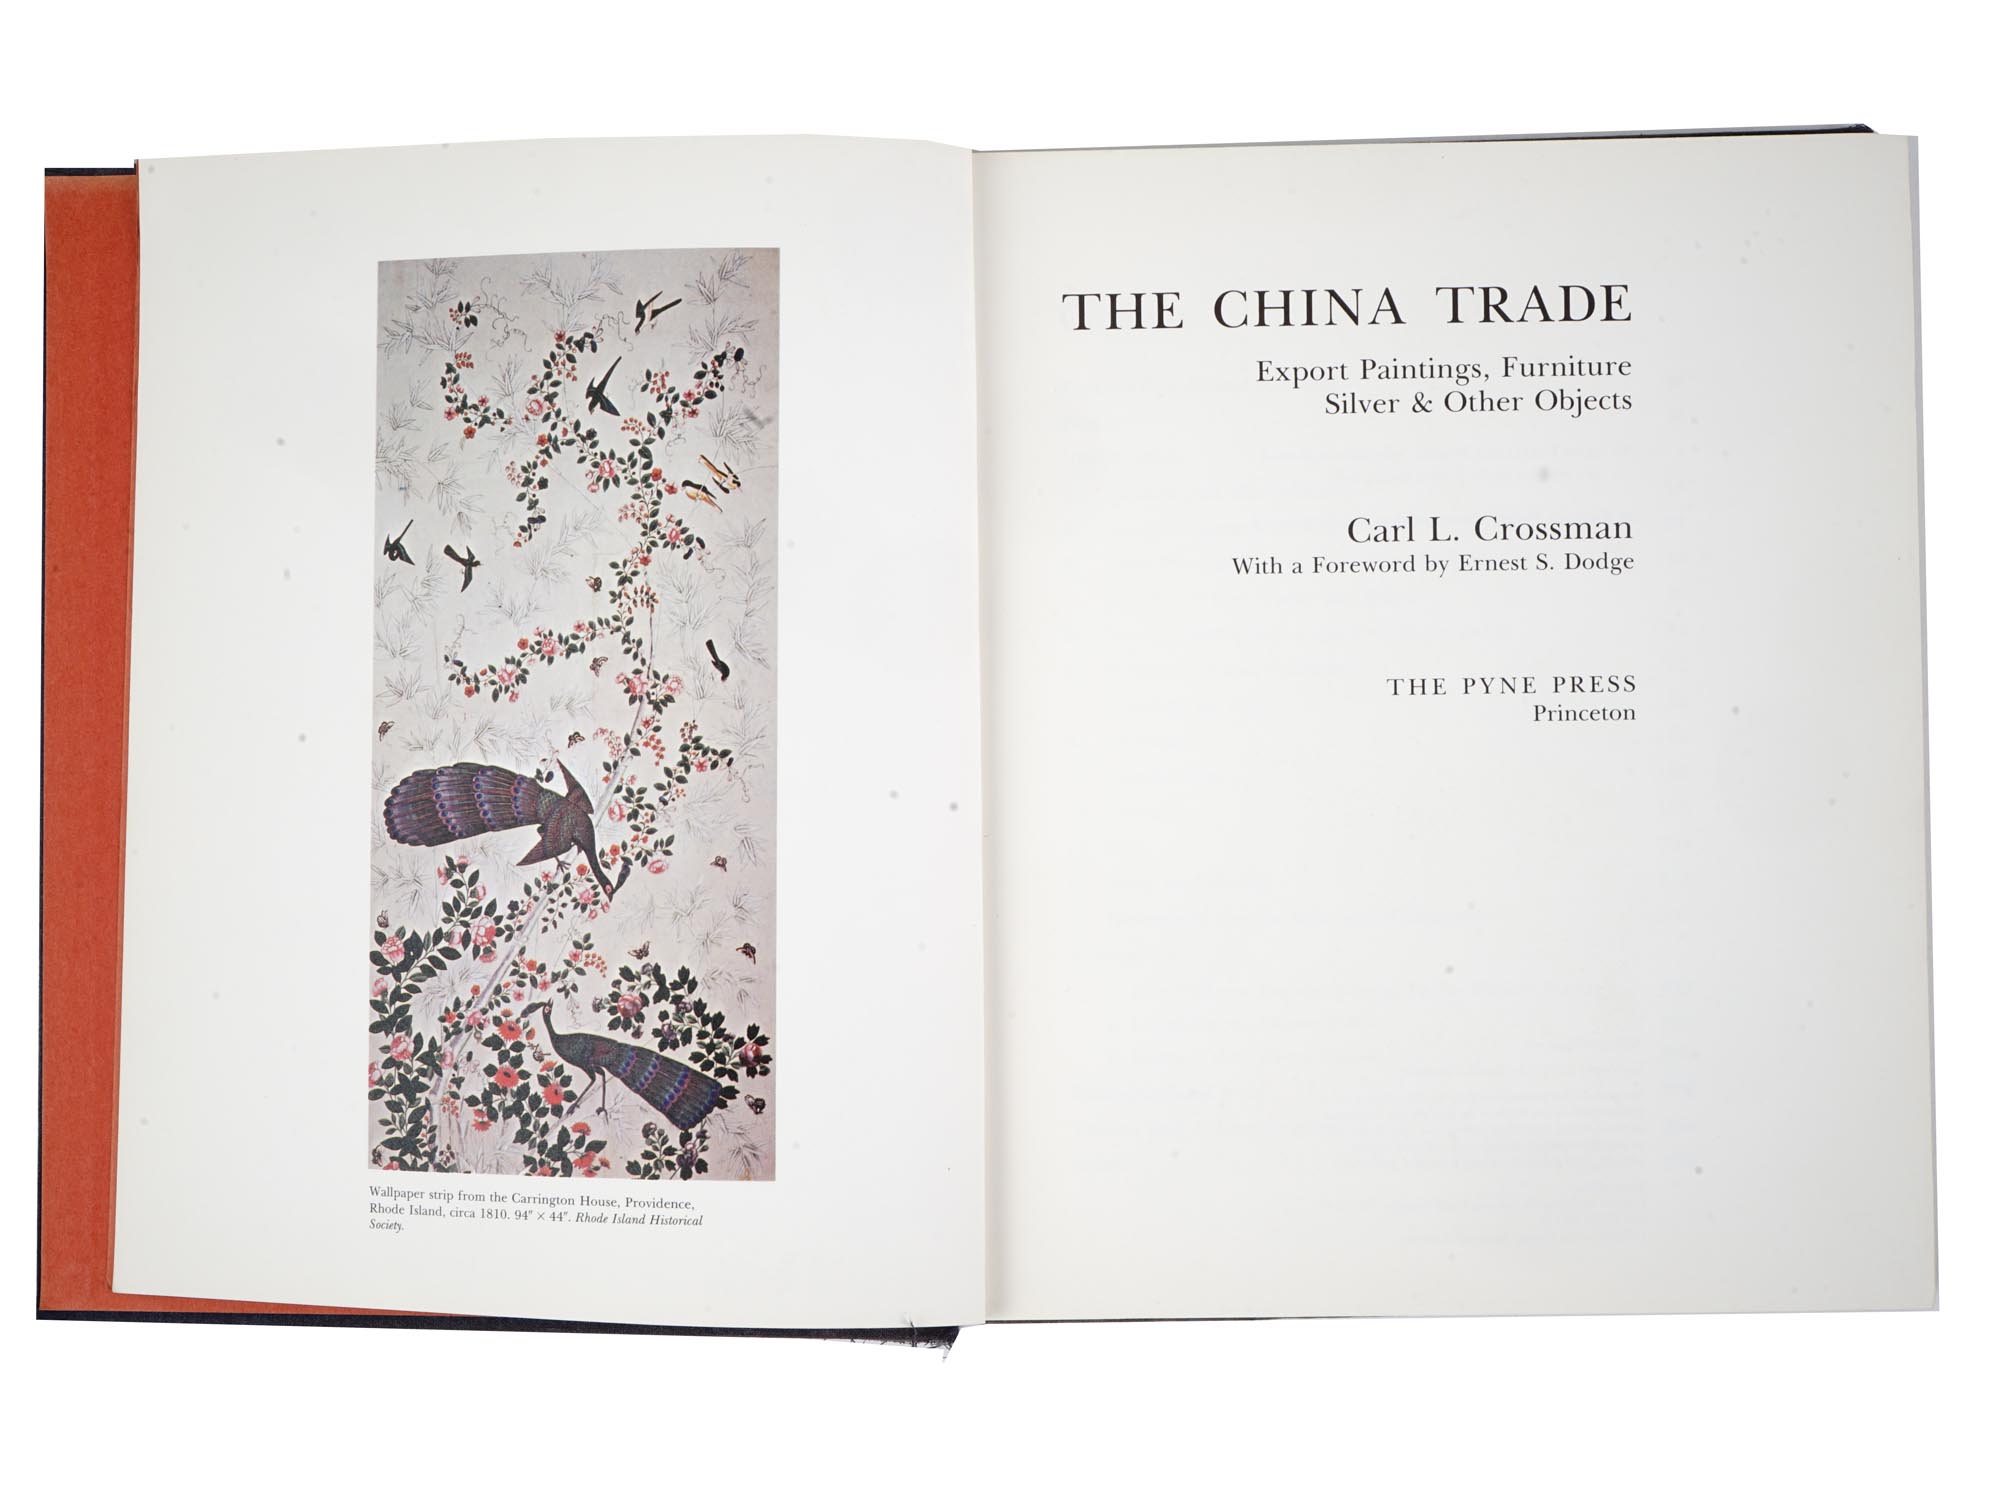 BOOKS AND ALBUMS ON CHINESE ART AND ILLUSTRATION PIC-3